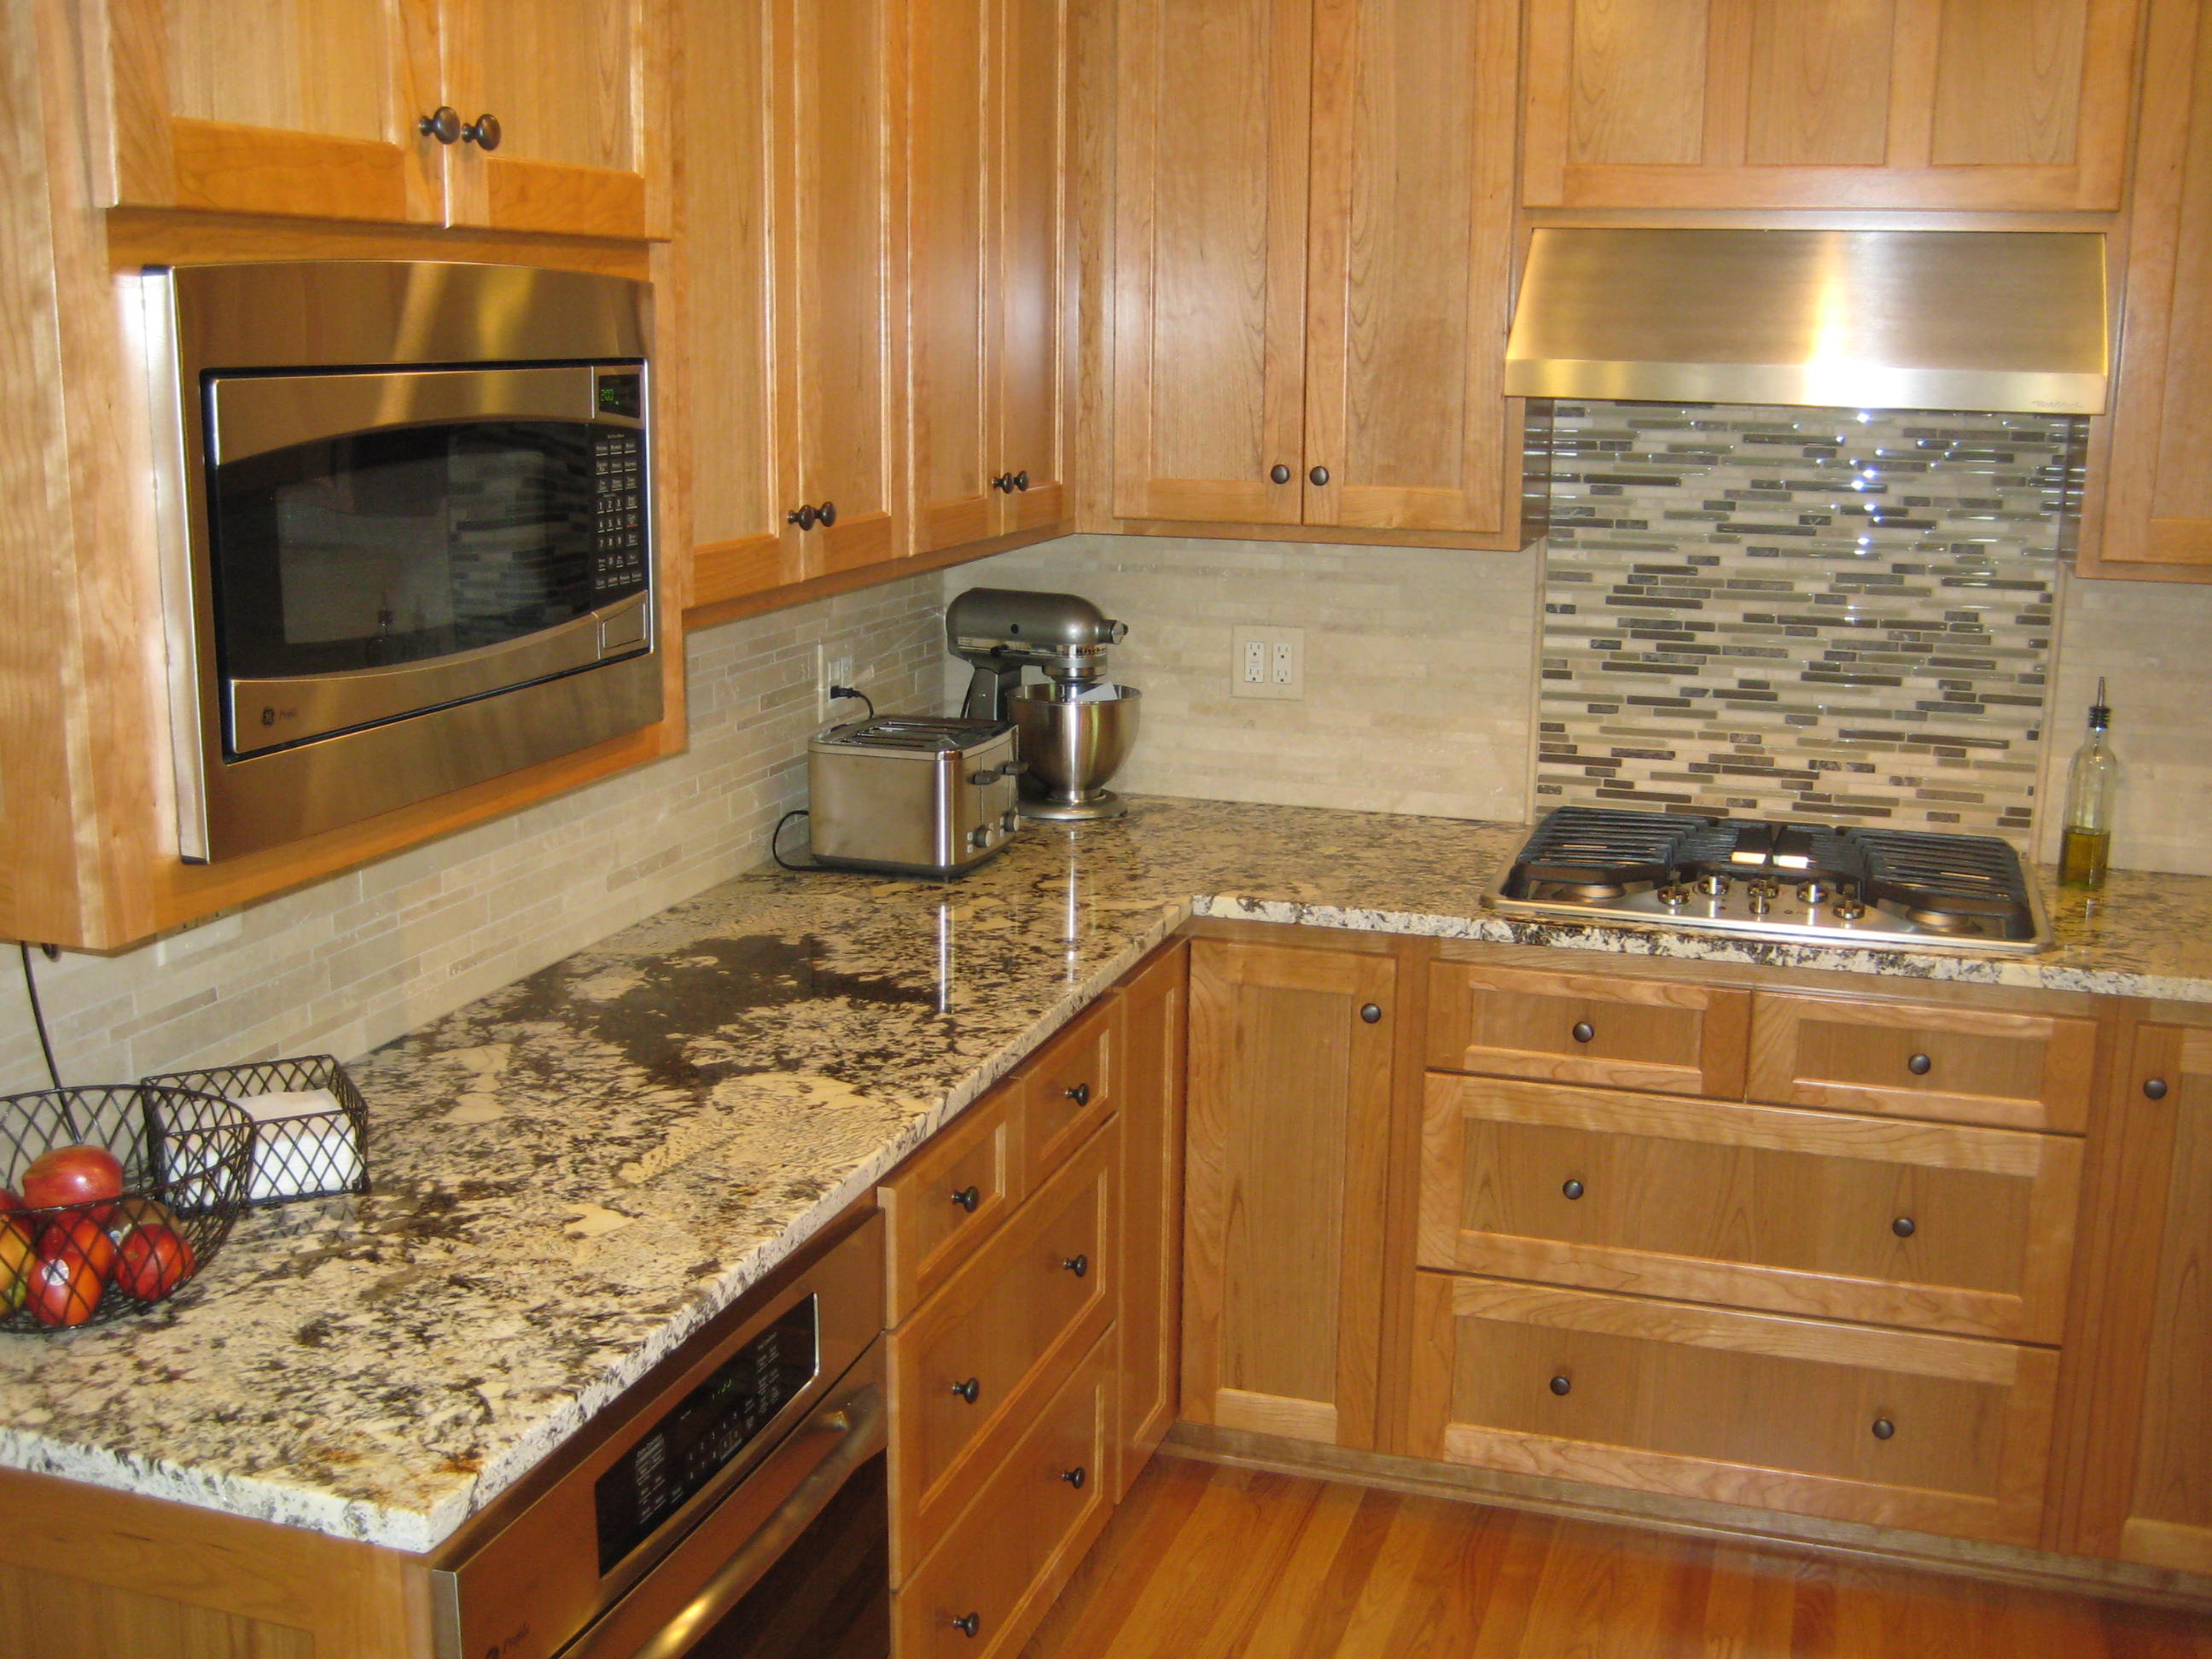 Backsplash Options Add Variety To Your Countertops